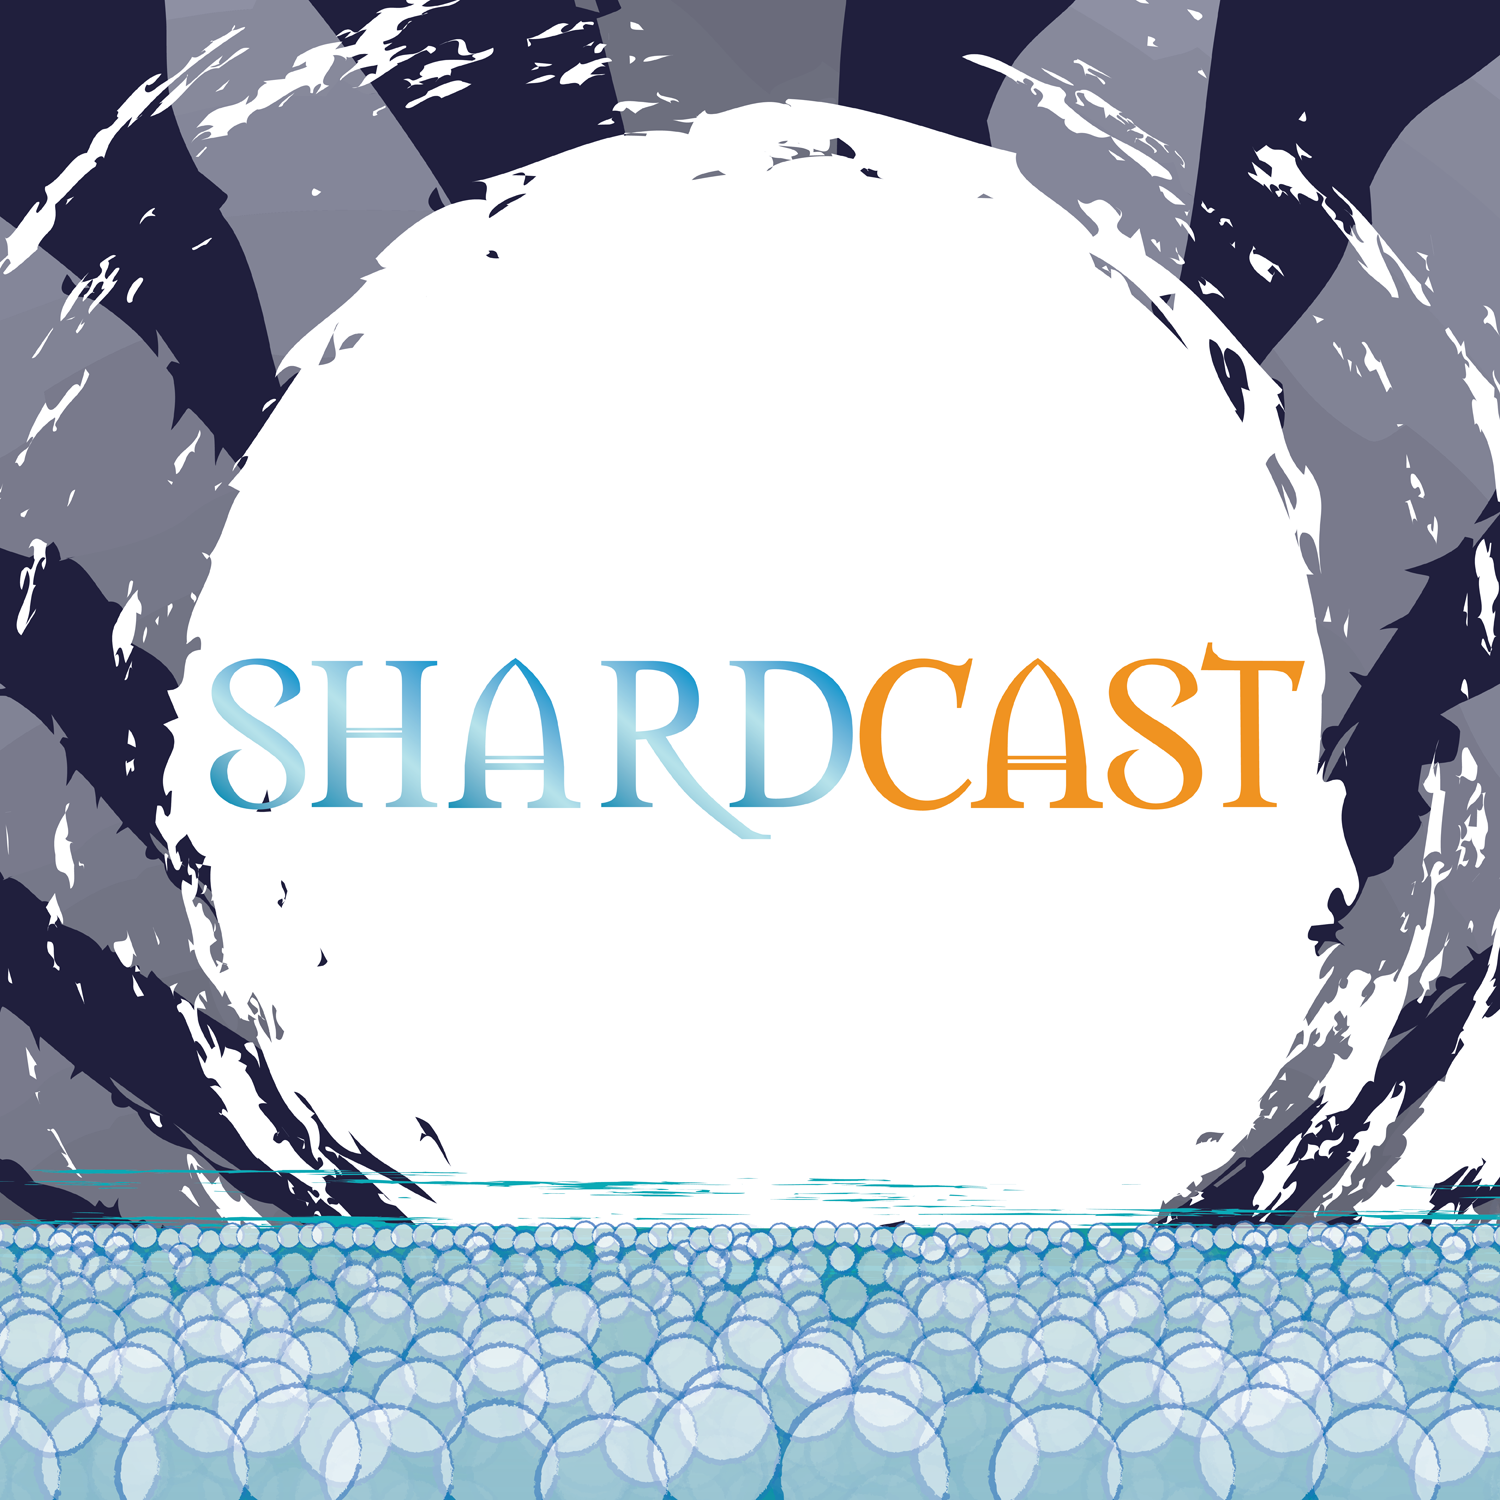 More information about "Shardcast: Lux Reactions"